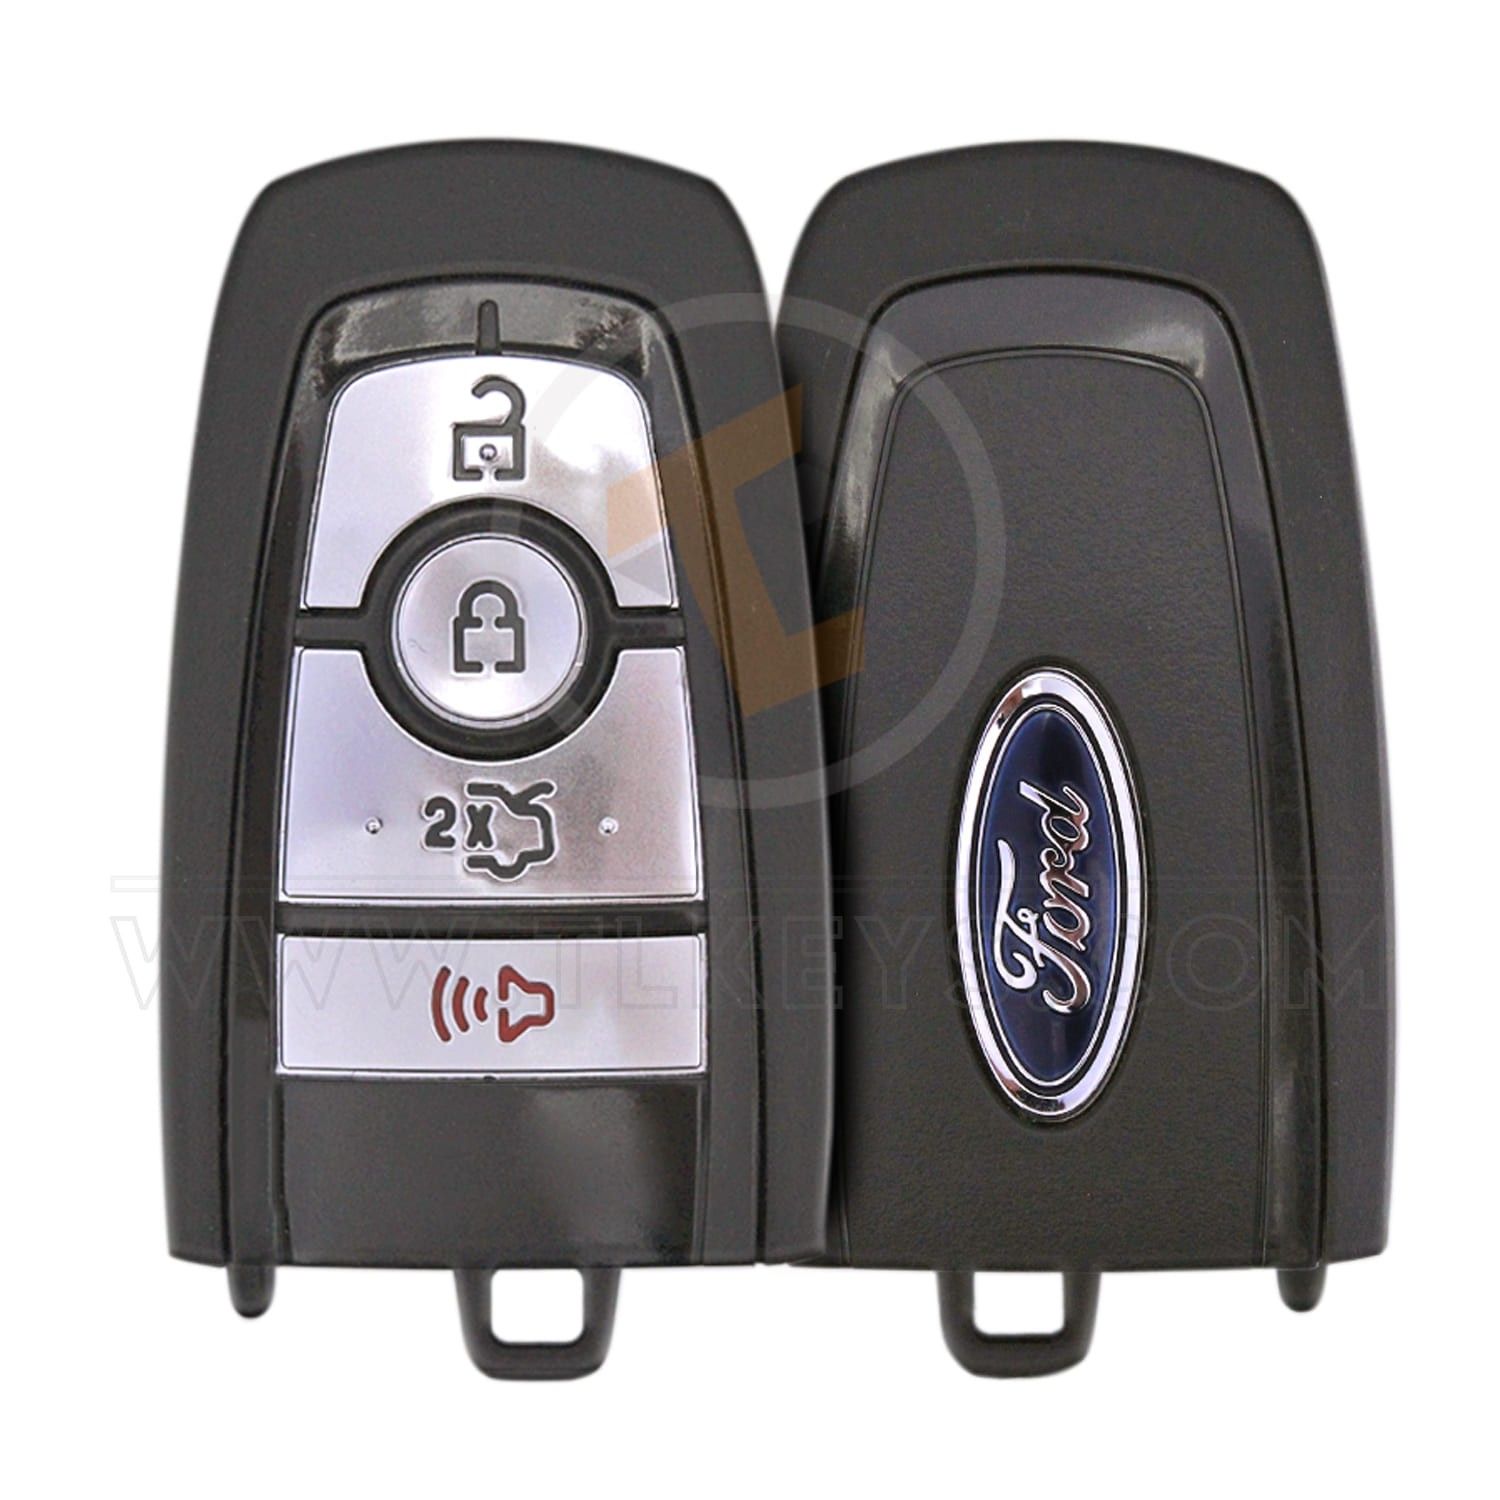 HS7T-15K601-AE Original Ford Smart Proximity Buttons 4